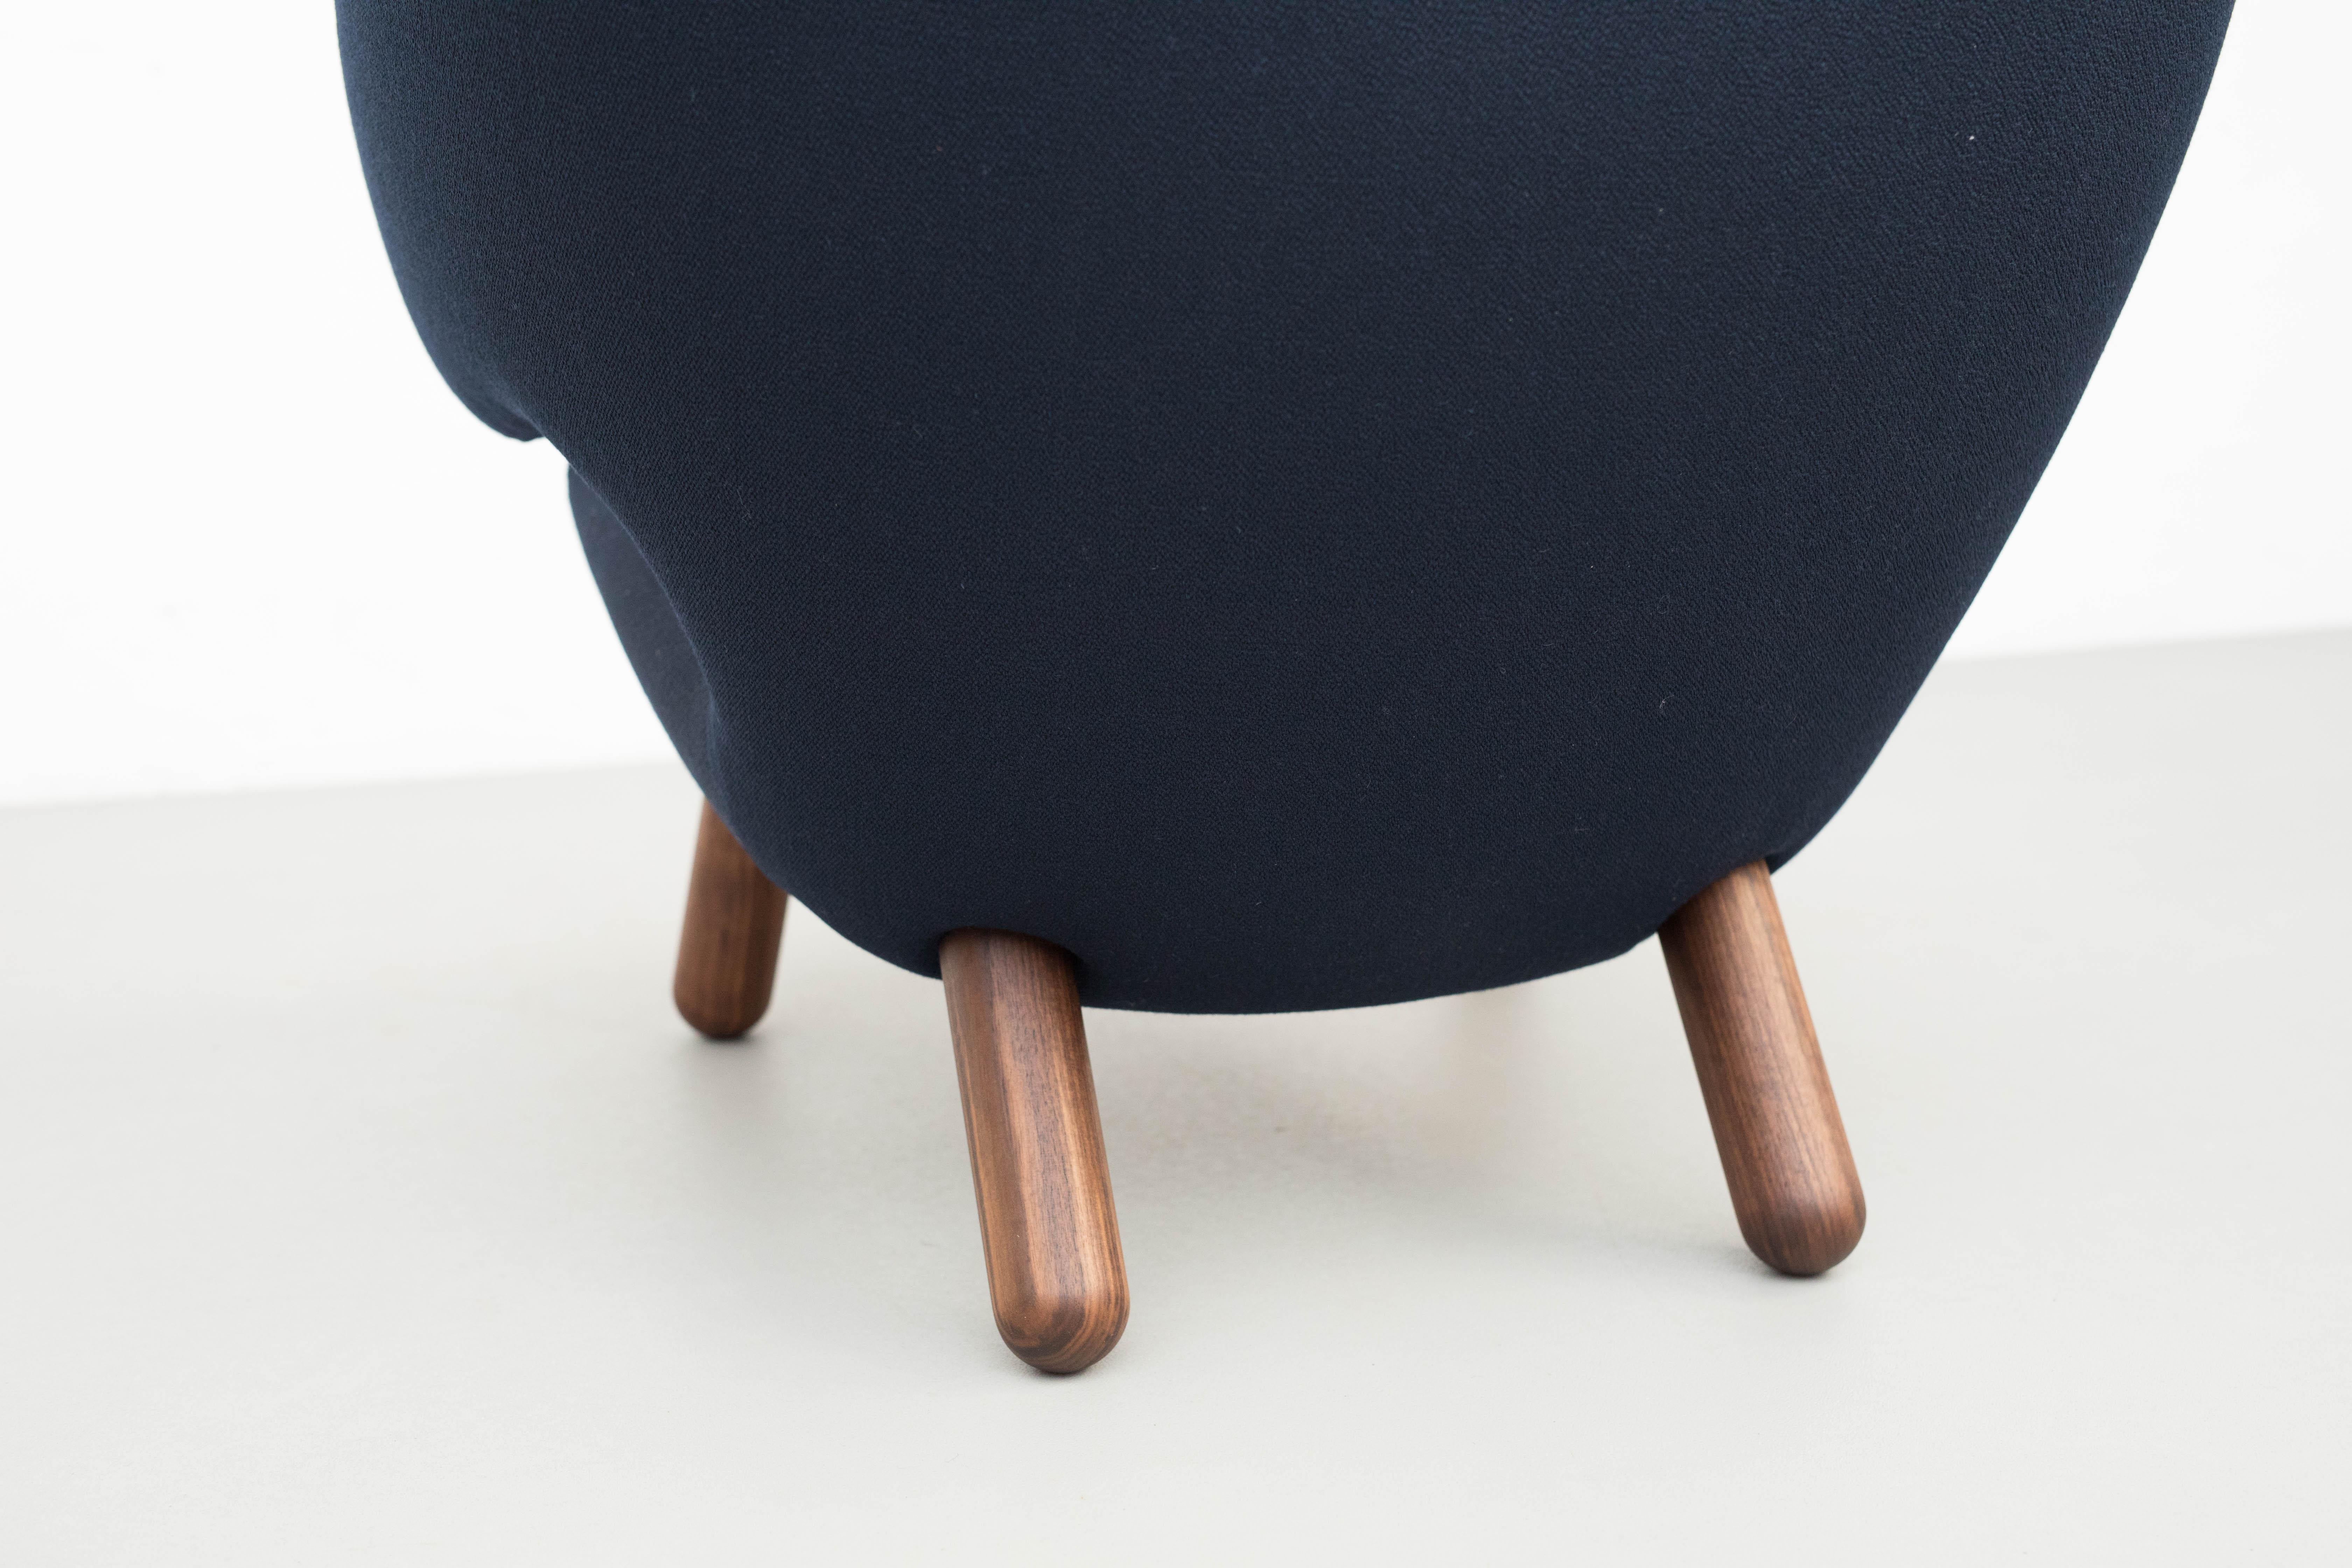 Finn Juhl Pelican Chair Upholstered in Wood and Fabric 5